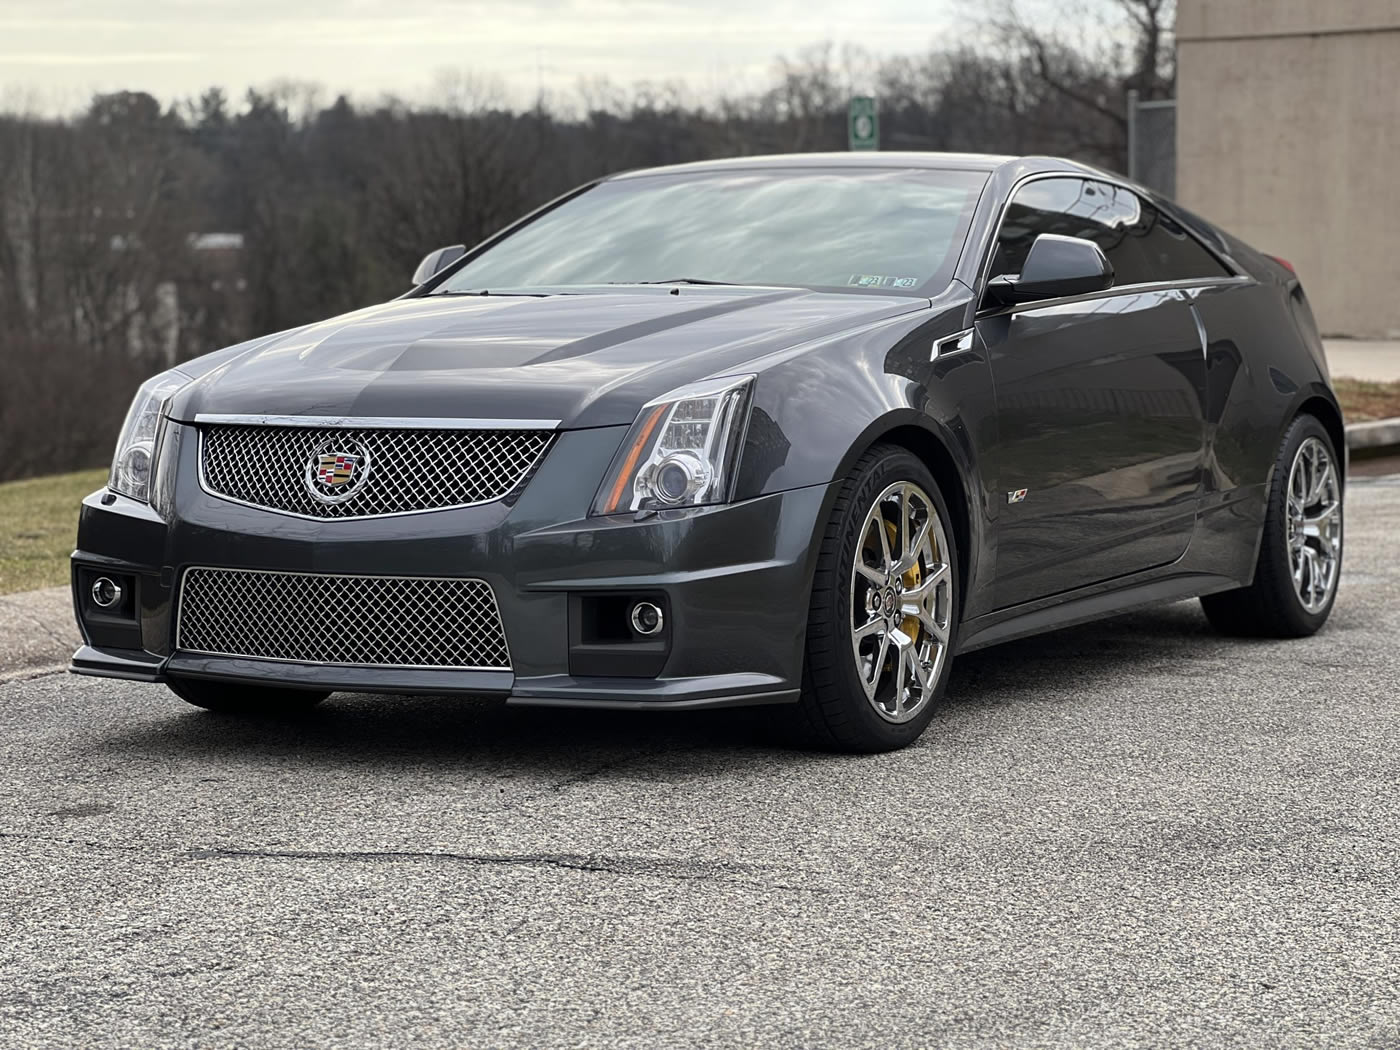 2012 Cadillac CTS-V Coupe in Thunder Gray Metallic Chromaflair